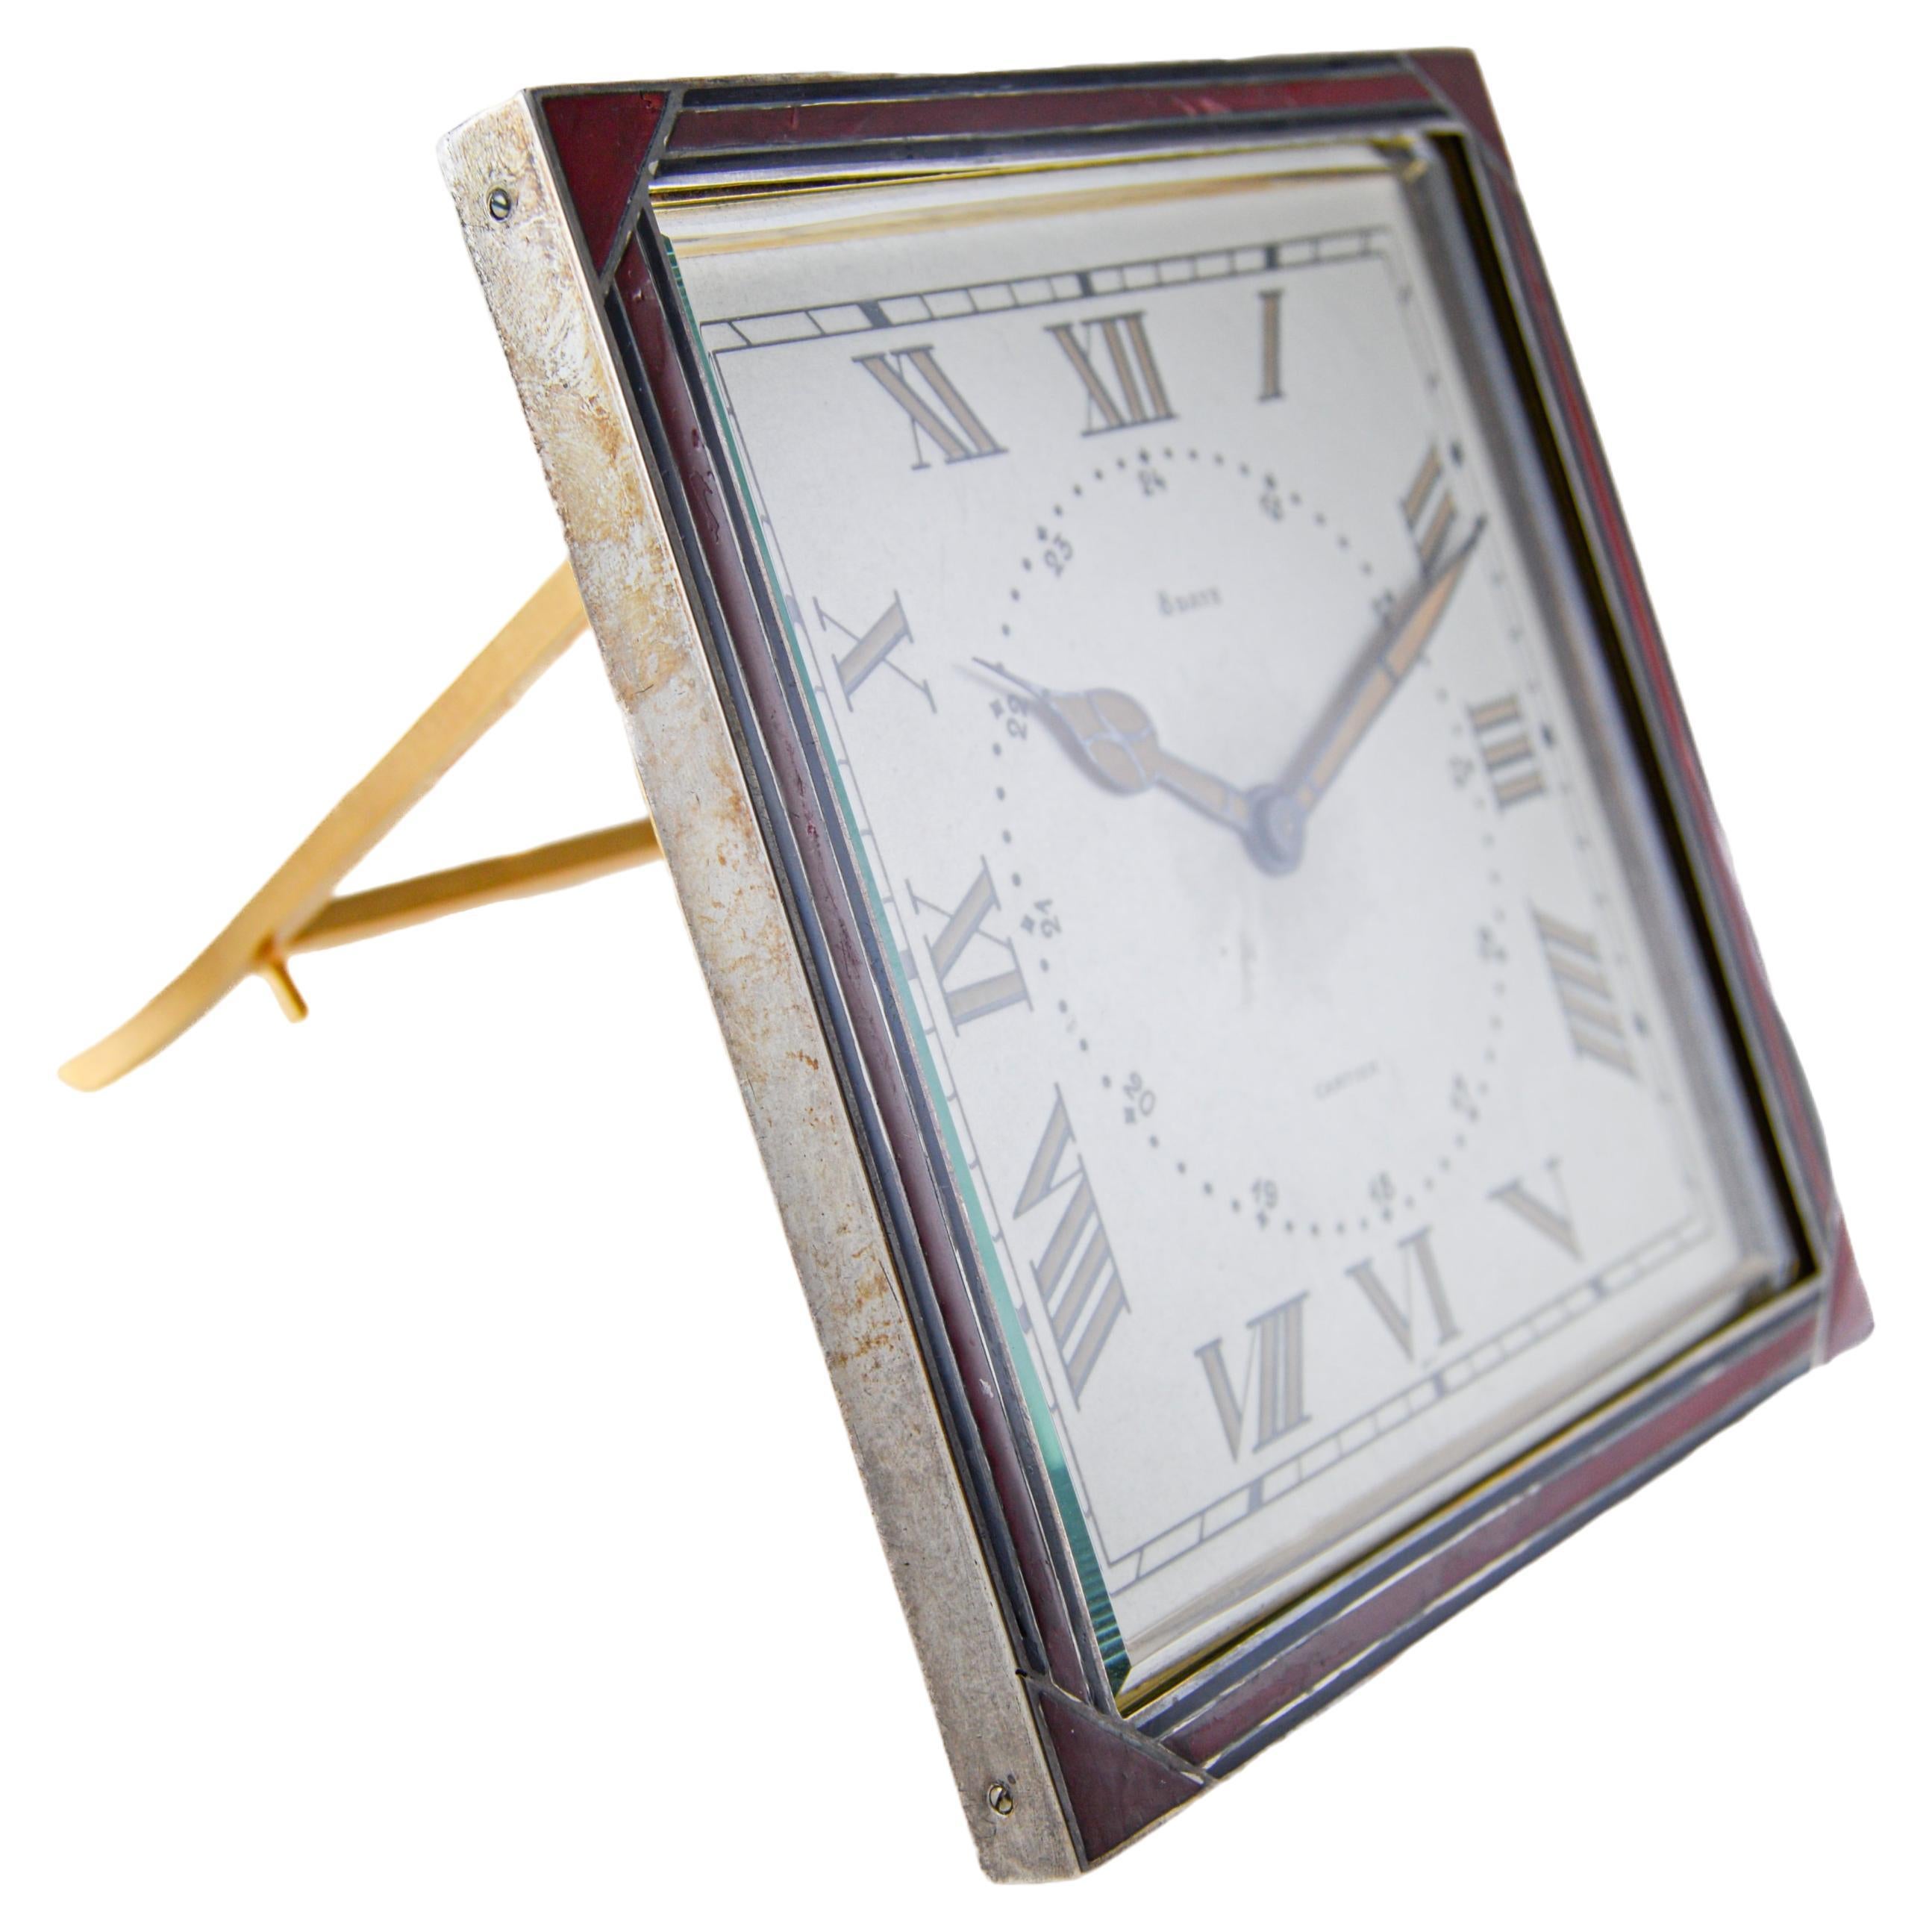 FACTORY / HOUSE: Cartier 
STYLE / REFERENCE: Art Deco / Desk Clock
METAL / MATERIAL: Sterling Silver / Kiln Fired Enamel 
CIRCA / YEAR: 1920's
DIMENSIONS / SIZE: 5 inches Length X 5 inches 
MOVEMENT / CALIBER: Manual Winding / 15 Jewels 
DIAL /